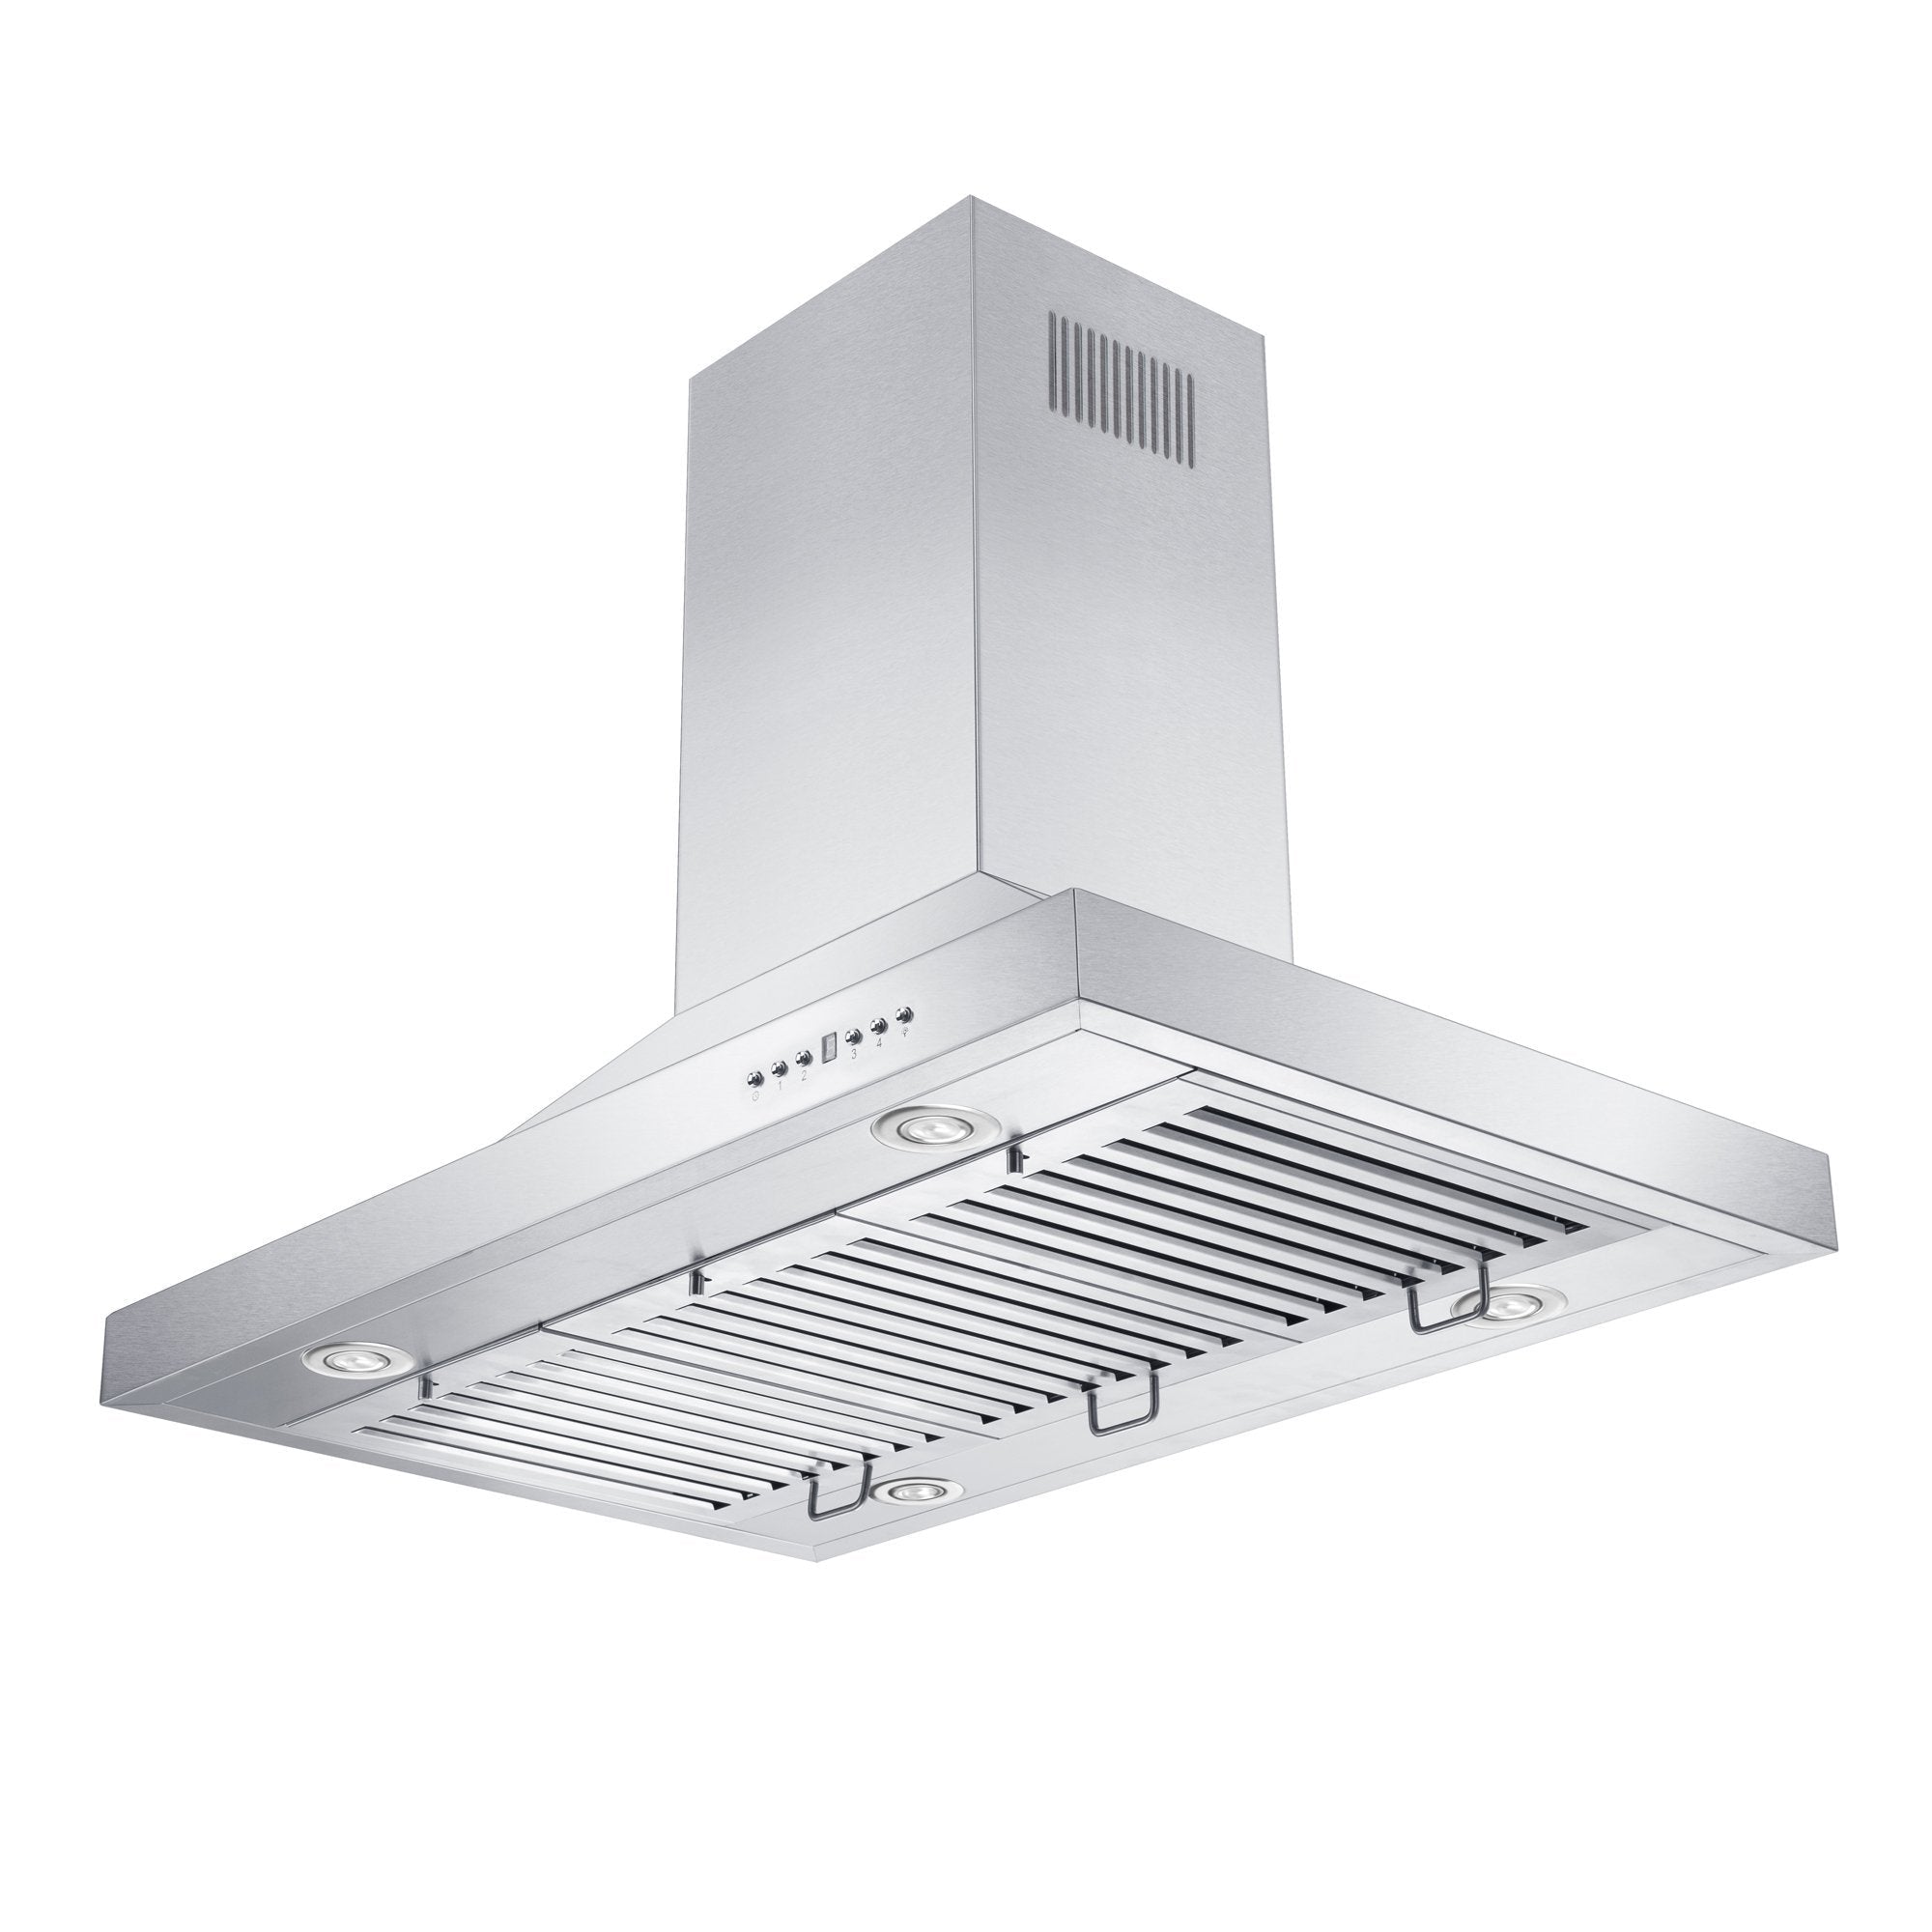 ZLINE Convertible Vent Island Mount Range Hood in Stainless Steel (GL2i) under view of LED lighting and baffle filters.